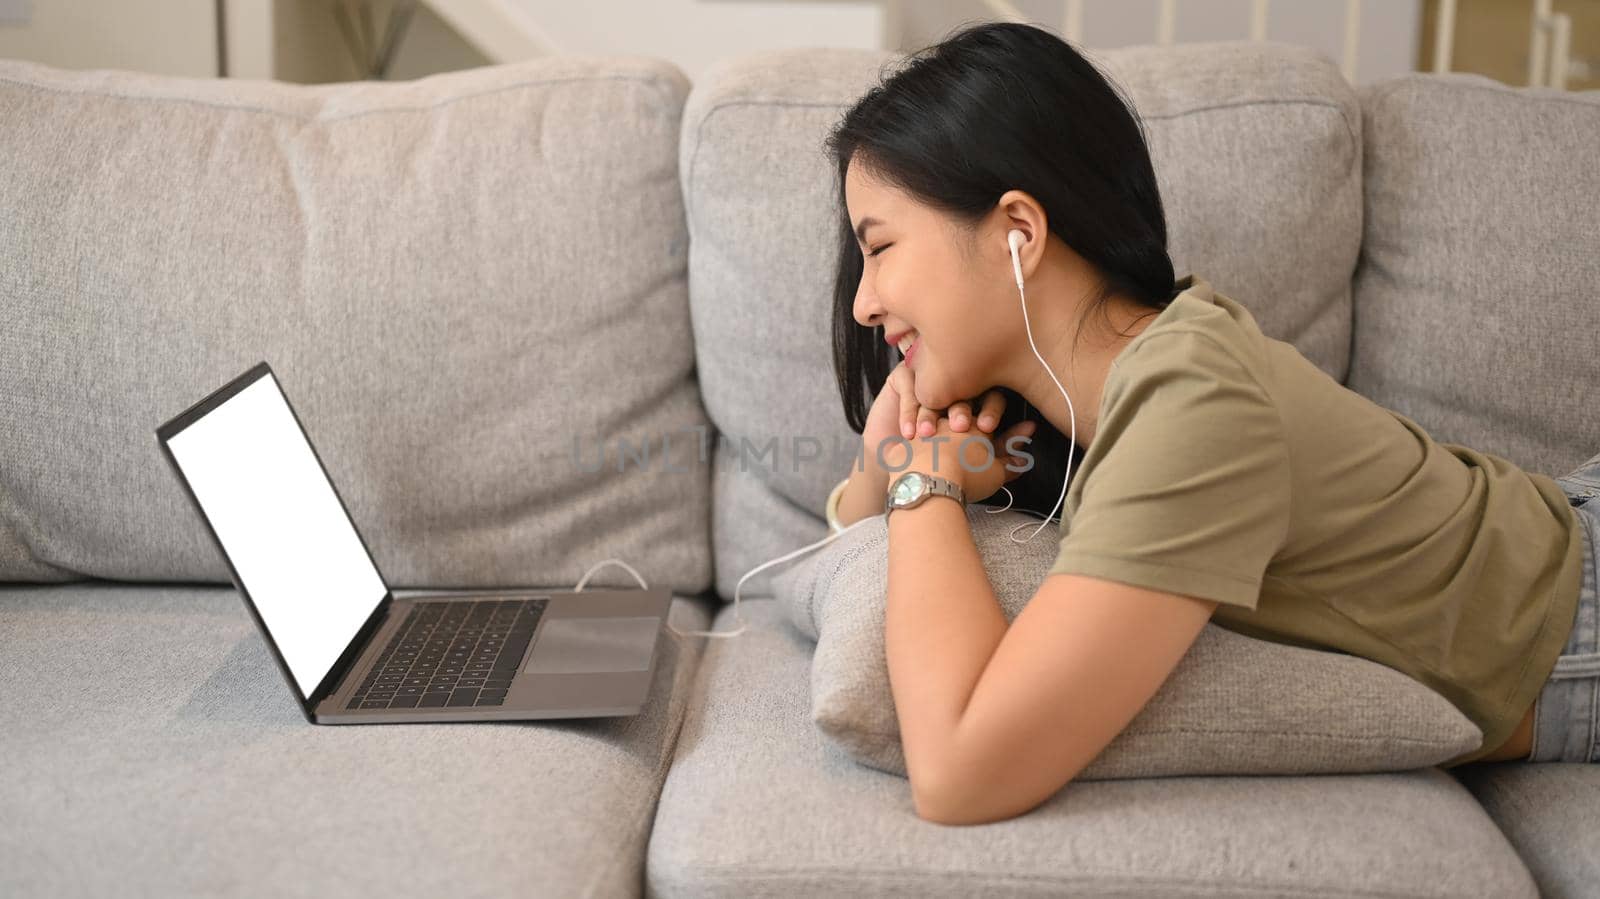 Smiling young woman relaxing in living room and talking by online virtual chat on computer laptop. Leisure activity and technology concept.